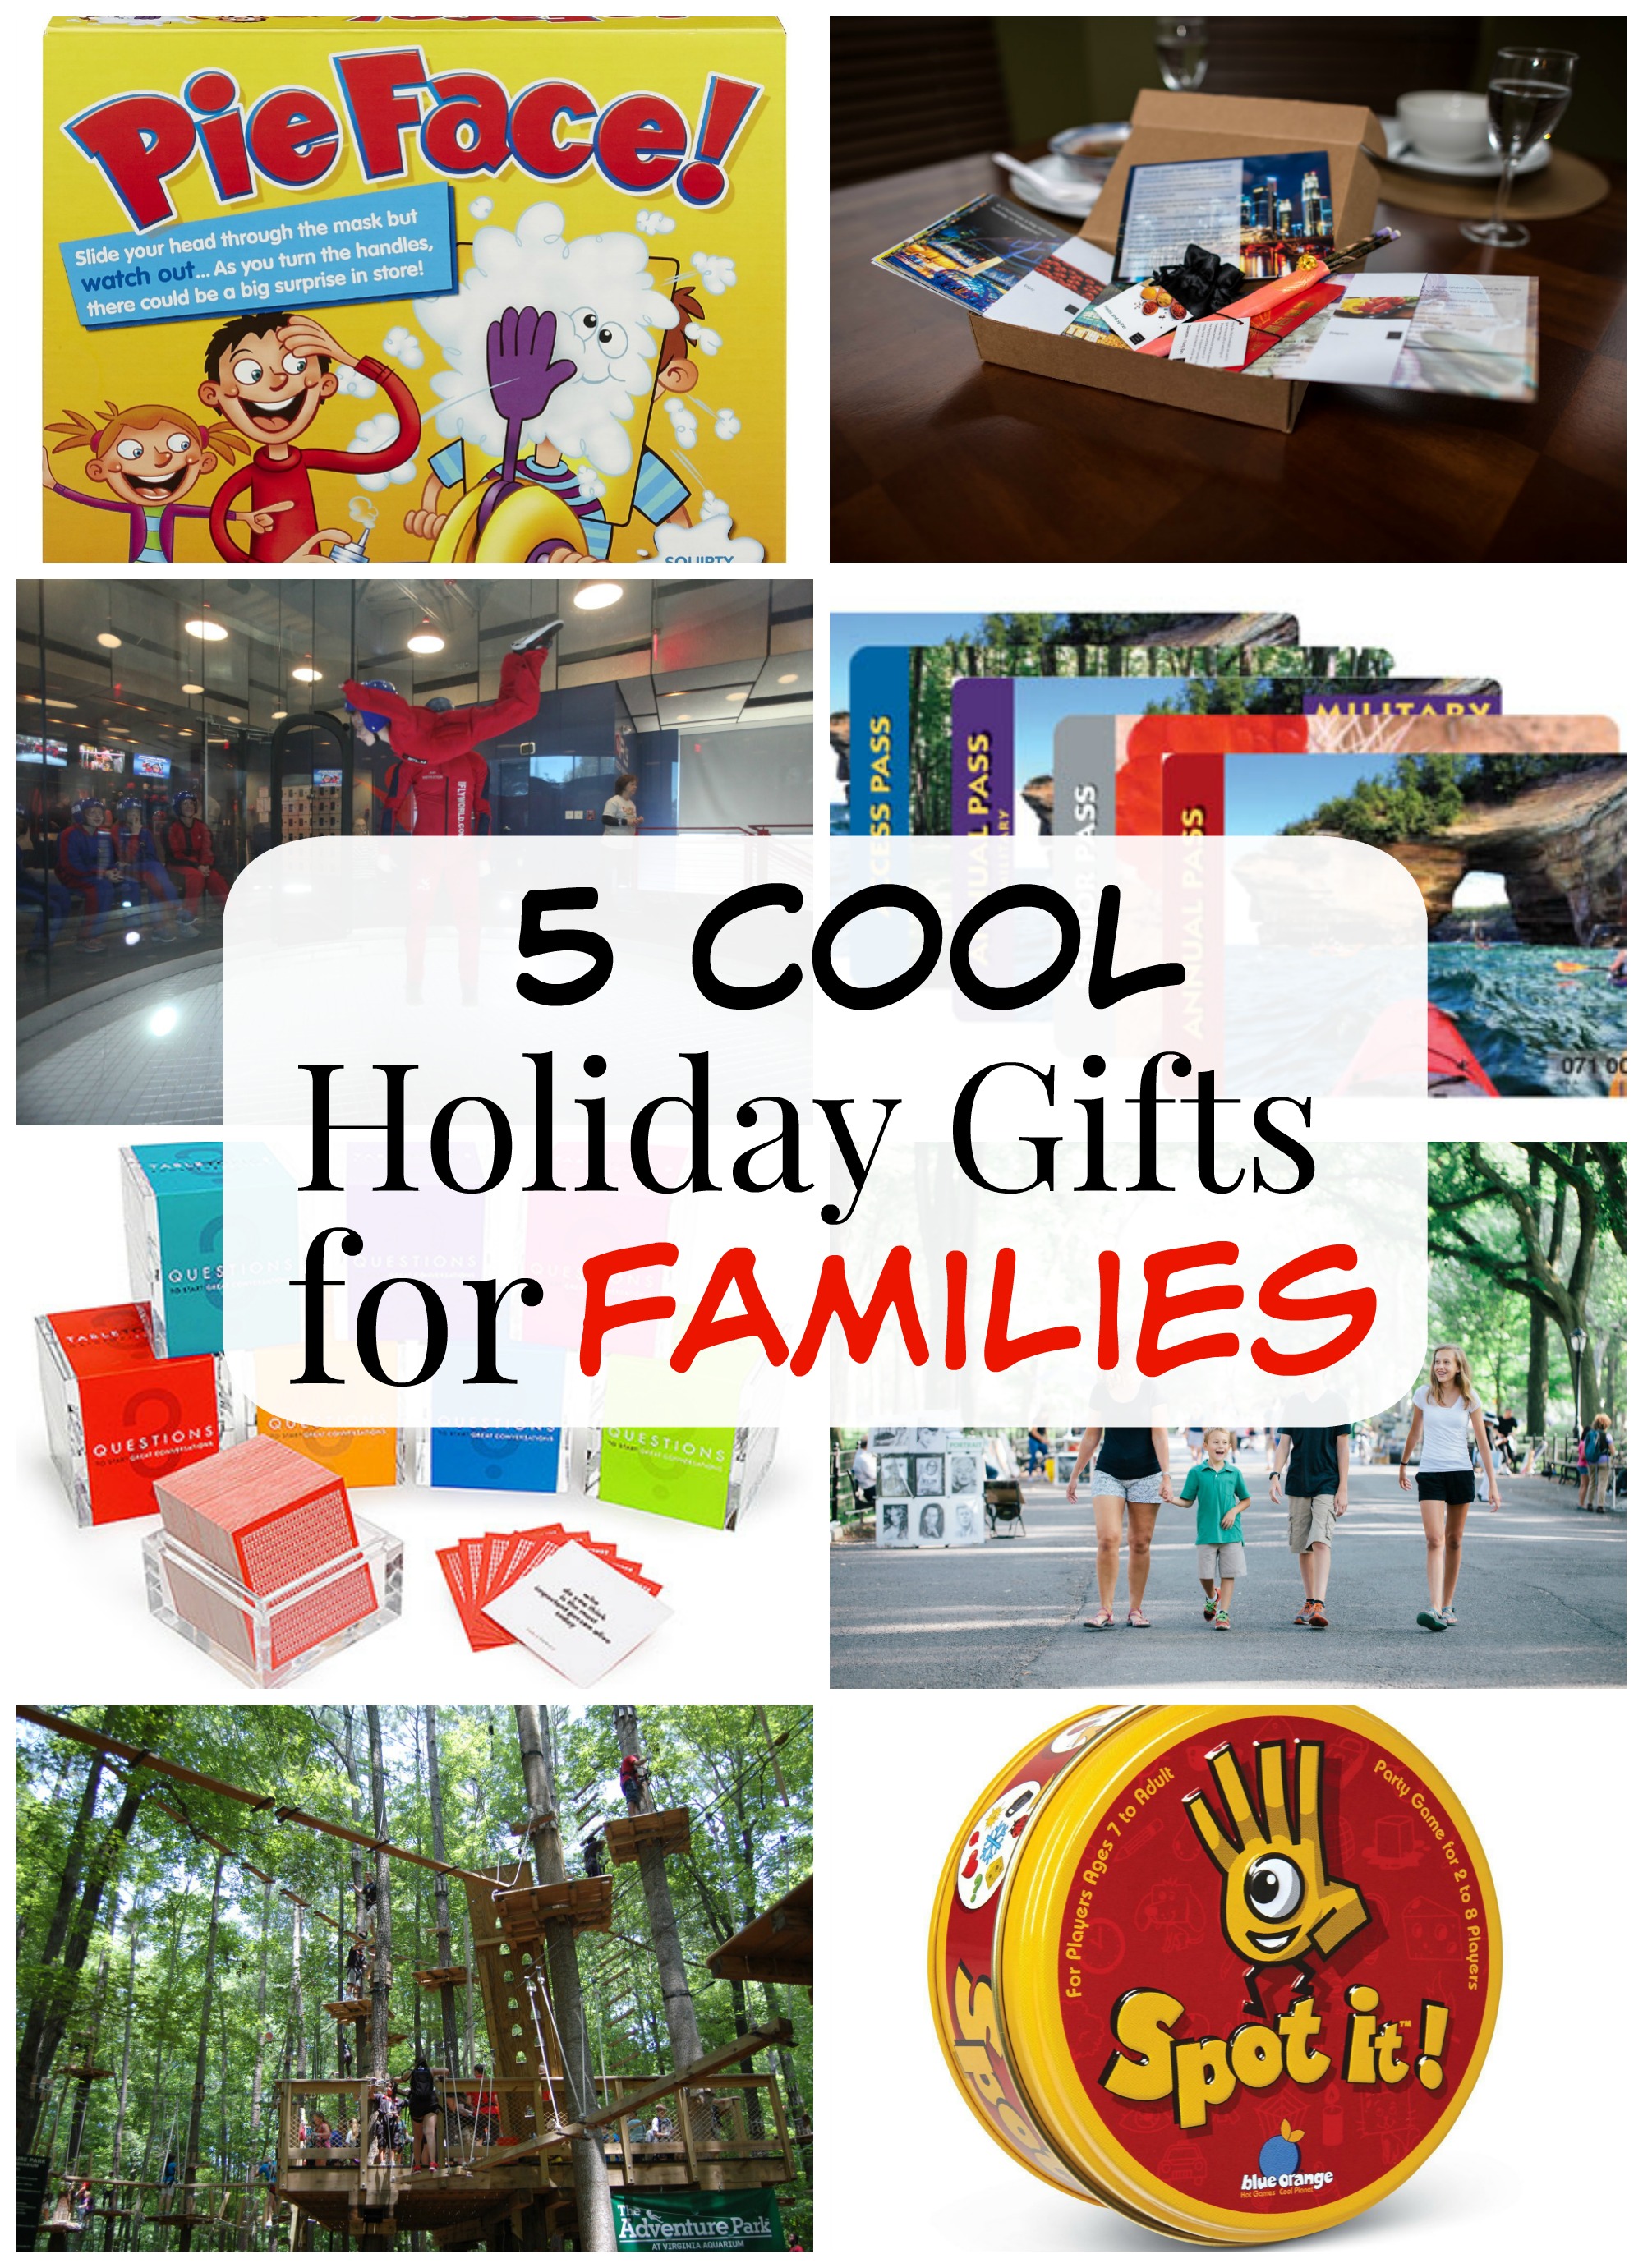 5 Cool Holiday Gifts for Families - R We There Yet Mom?